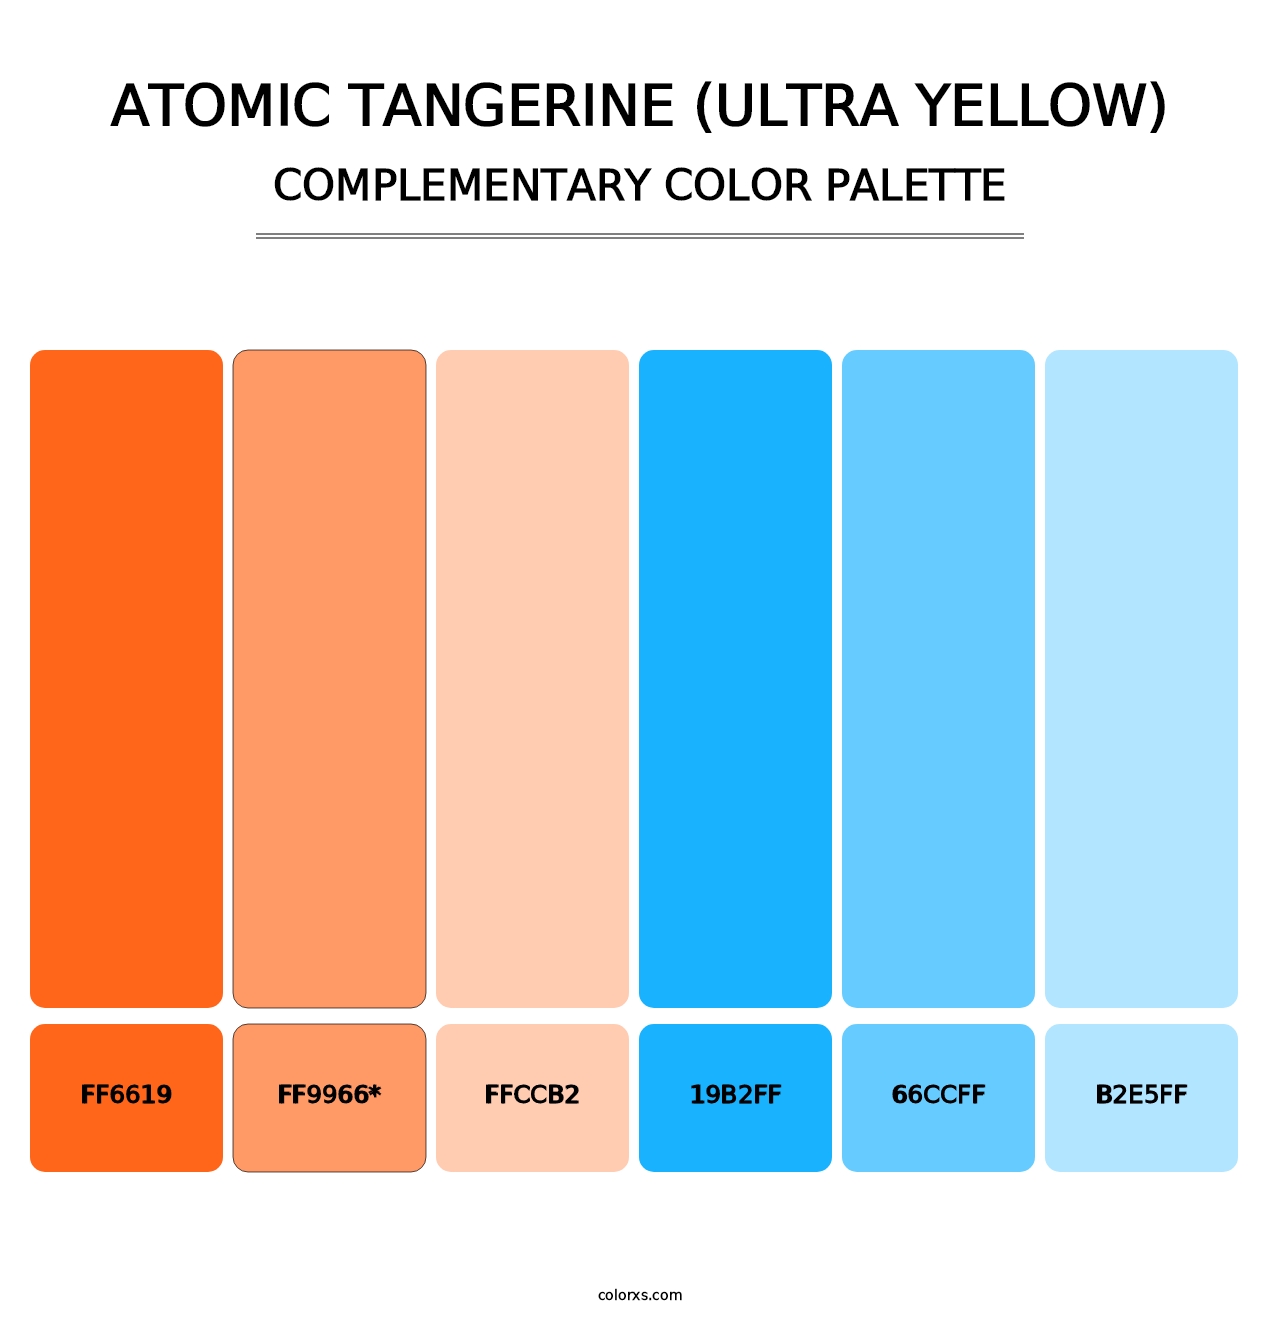 Atomic Tangerine (Ultra Yellow) - Complementary Color Palette